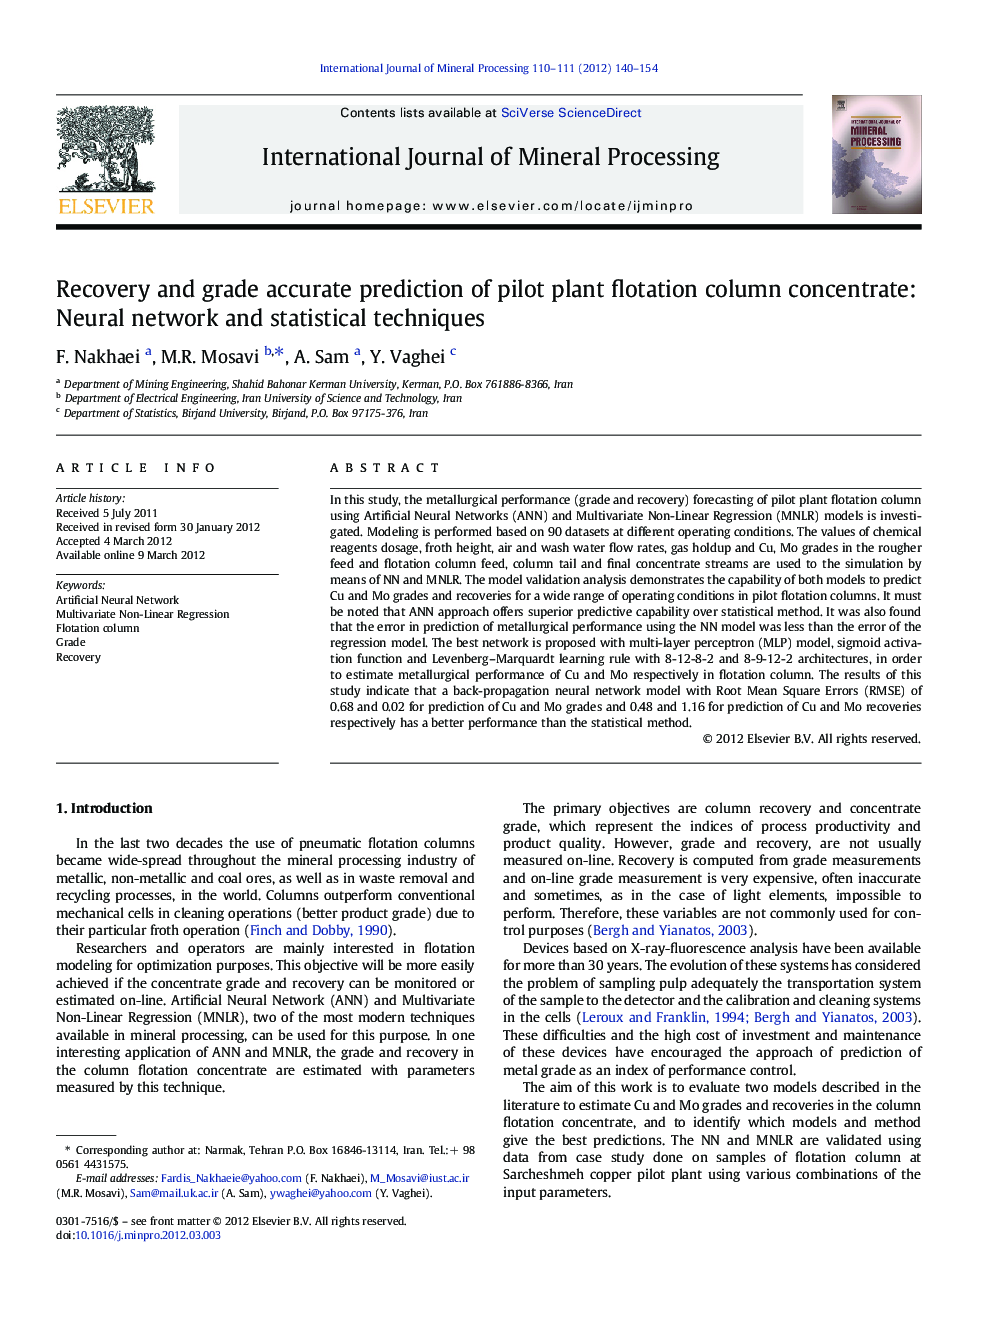 Recovery and grade accurate prediction of pilot plant flotation column concentrate: Neural network and statistical techniques